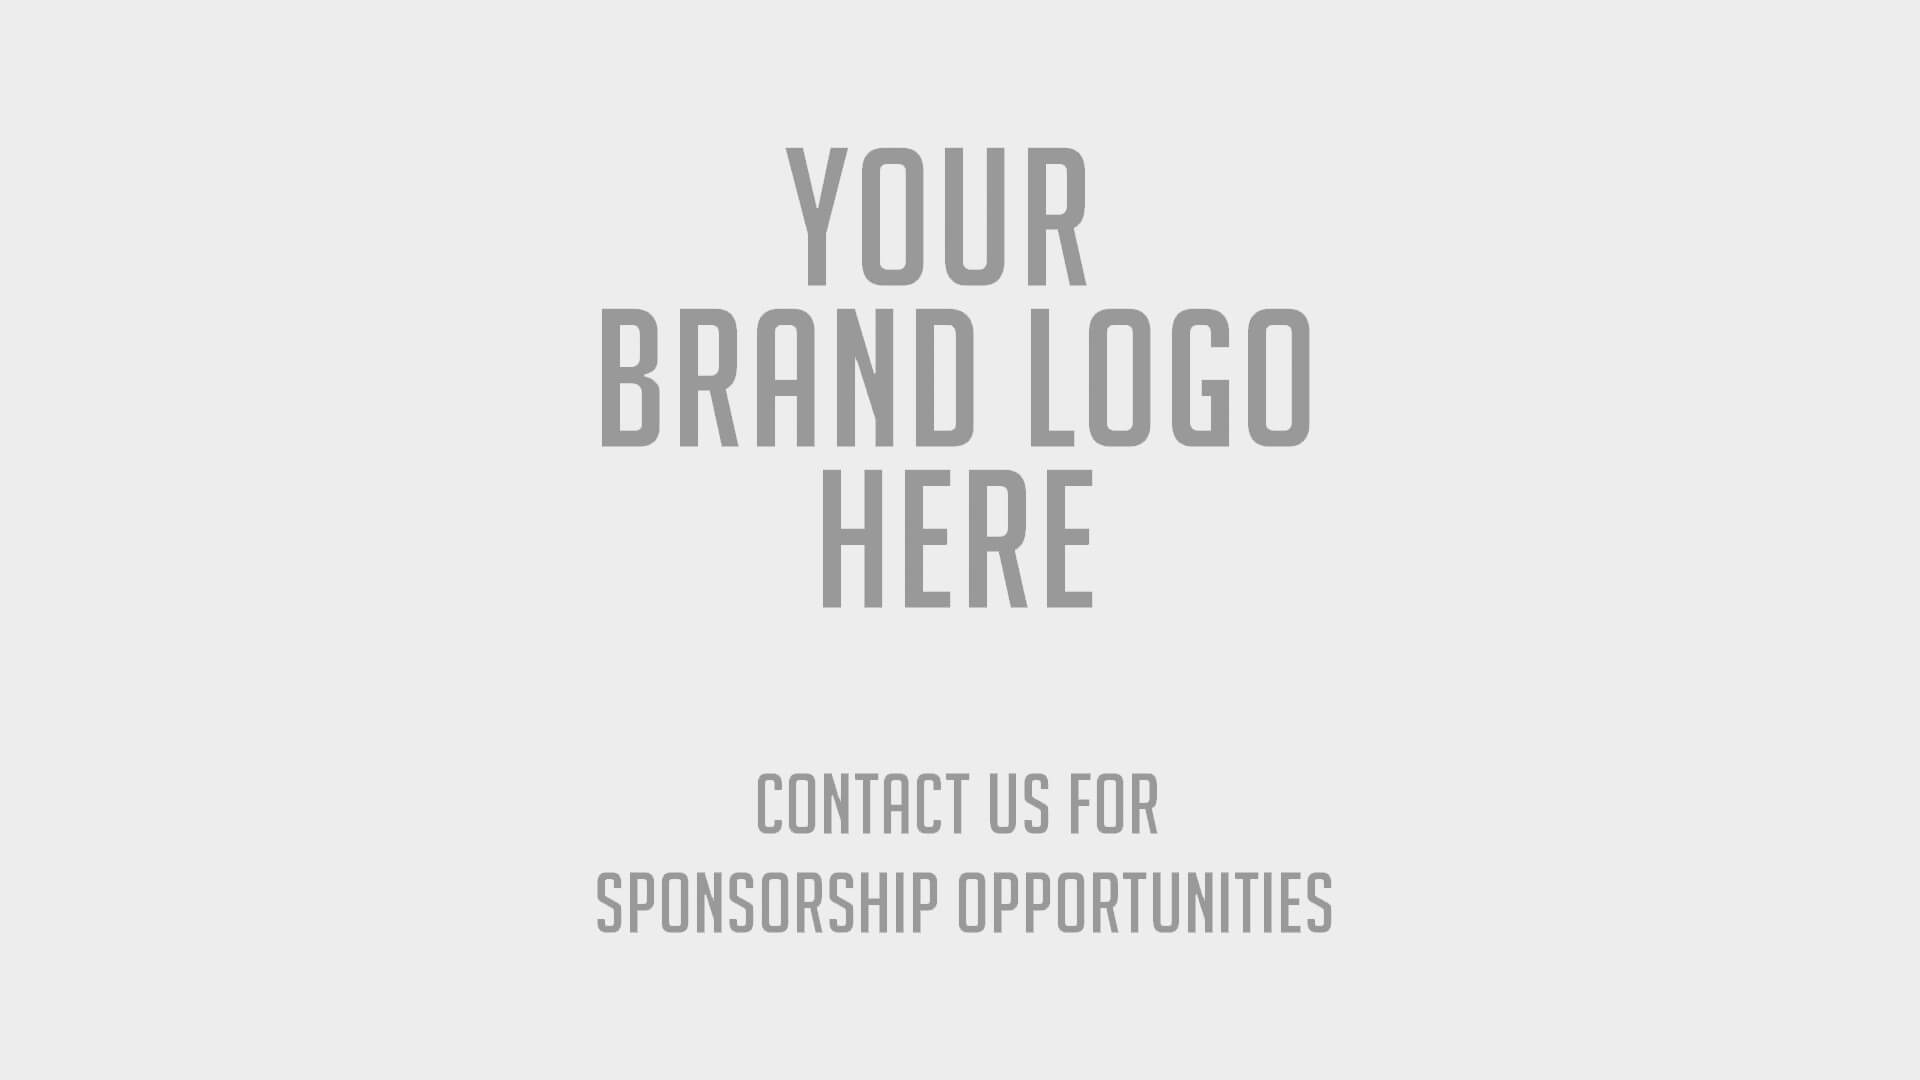 Click to find out how to place your logo here